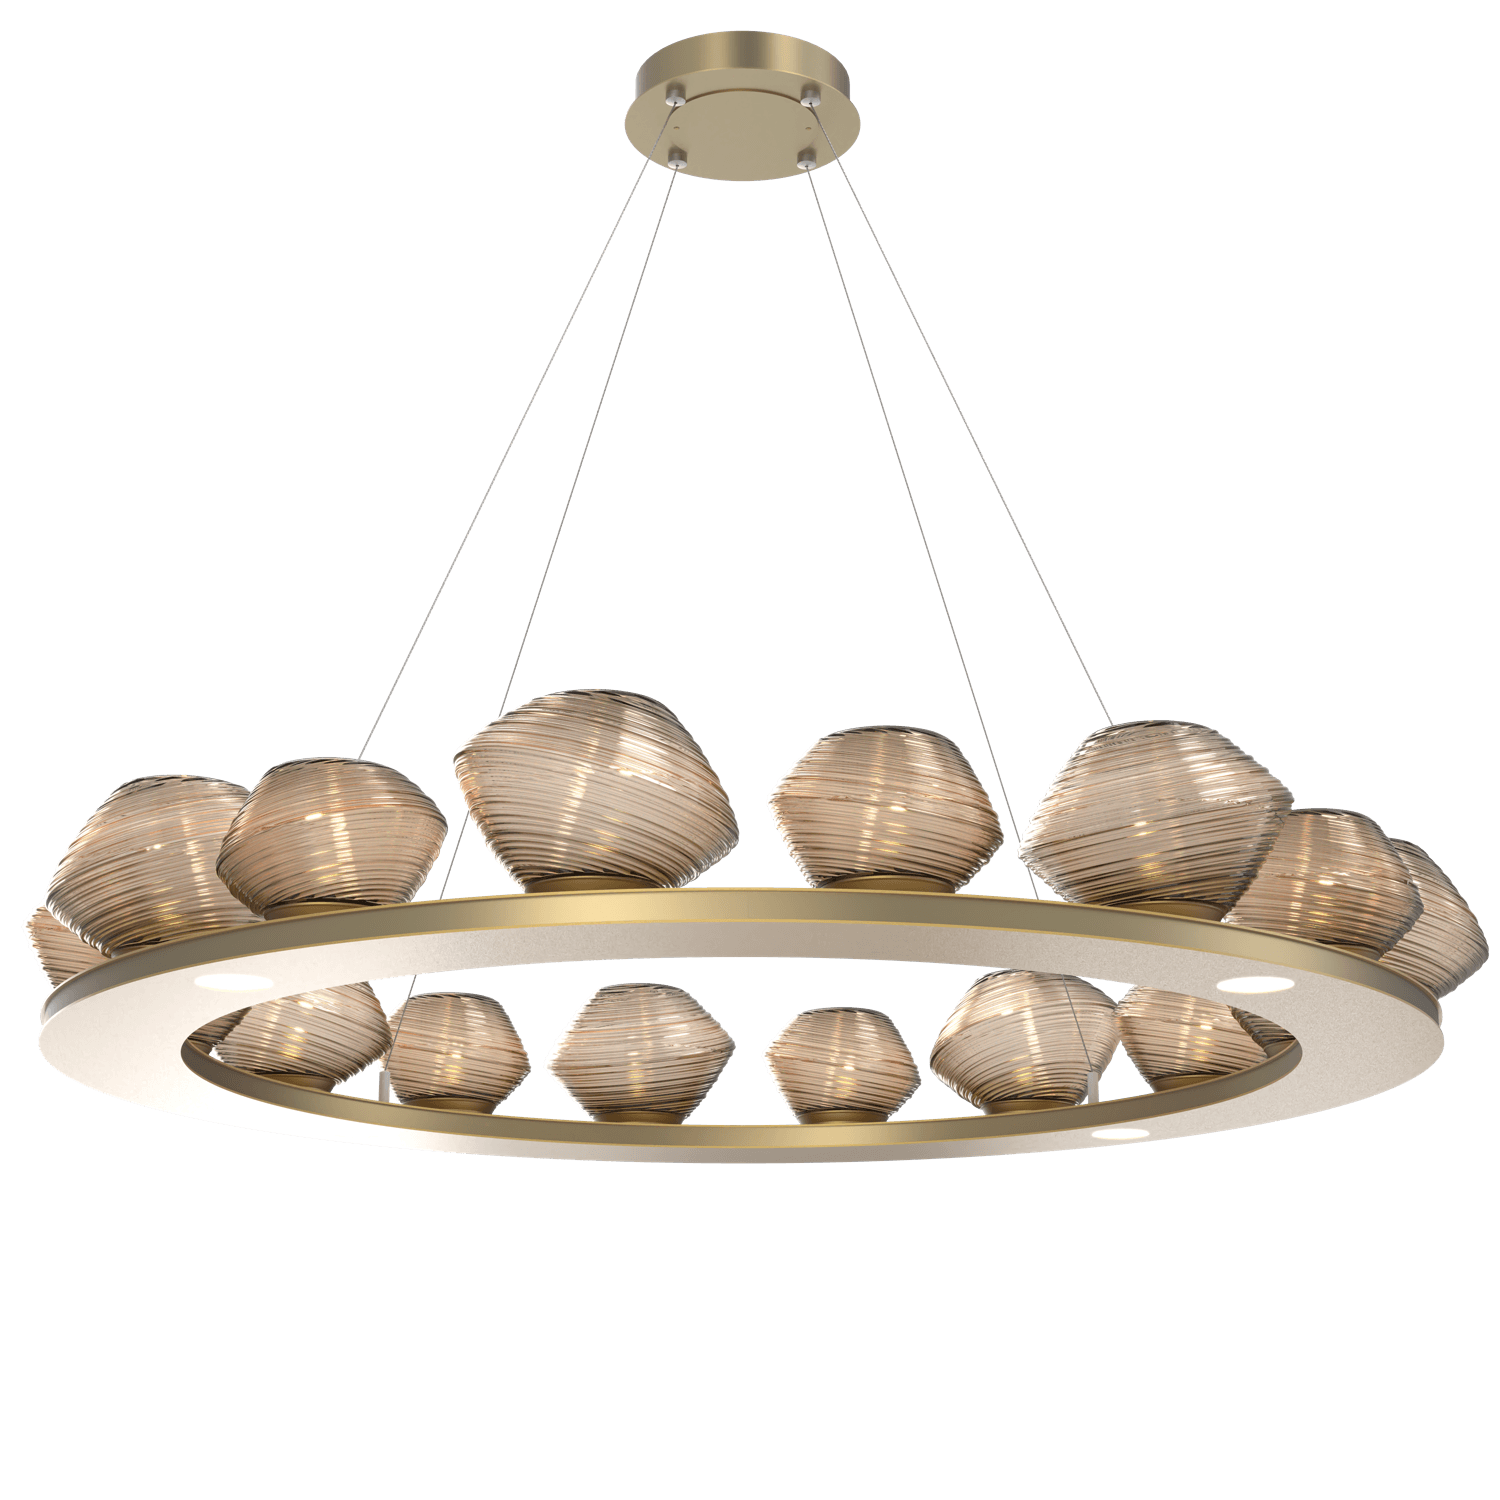 CHB0089-0D-GB-B-Hammerton-Studio-Mesa-48-inch-ring-chandelier-with-gilded-brass-finish-and-bronze-blown-glass-shades-and-LED-lamping